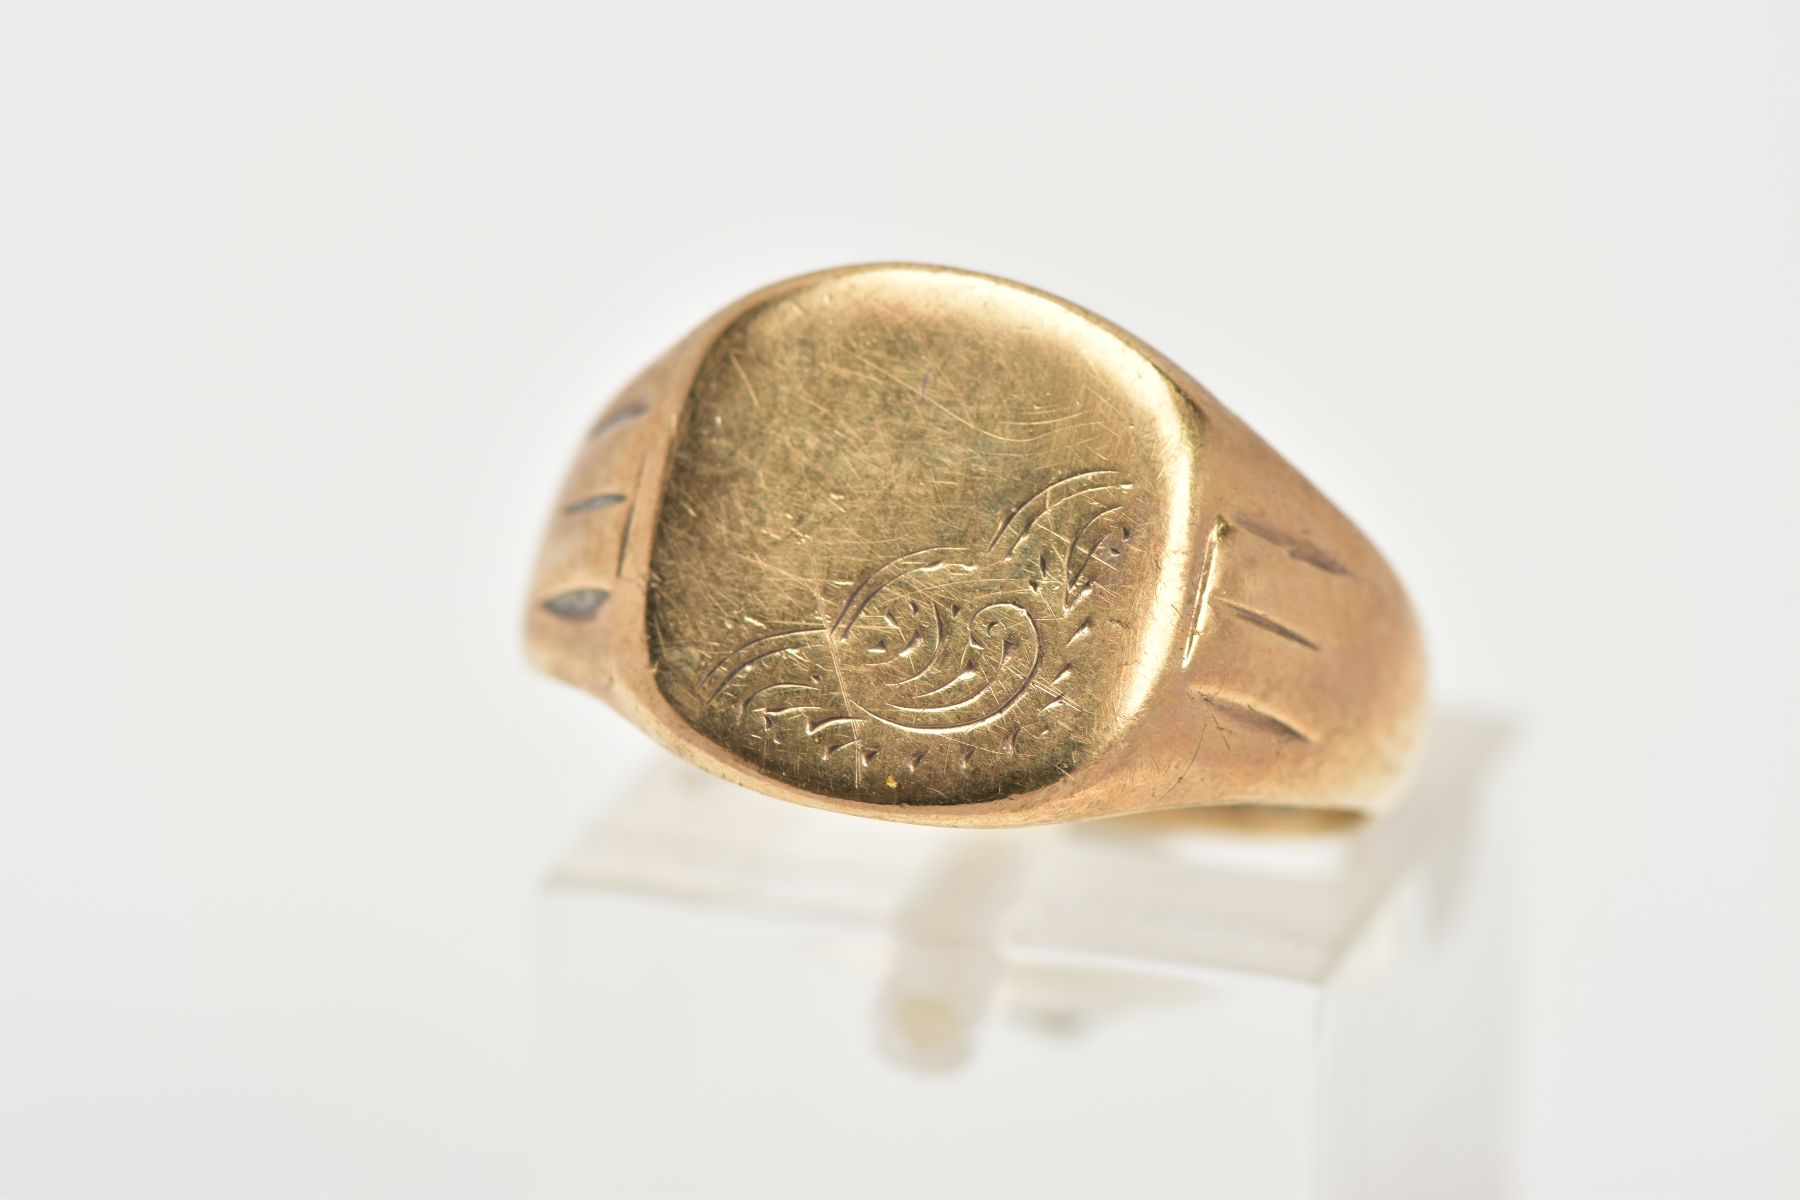 A 9CT GOLD SQUARE SIGNET RING, engraved detail on the face, approximately 12.4mm at the widest